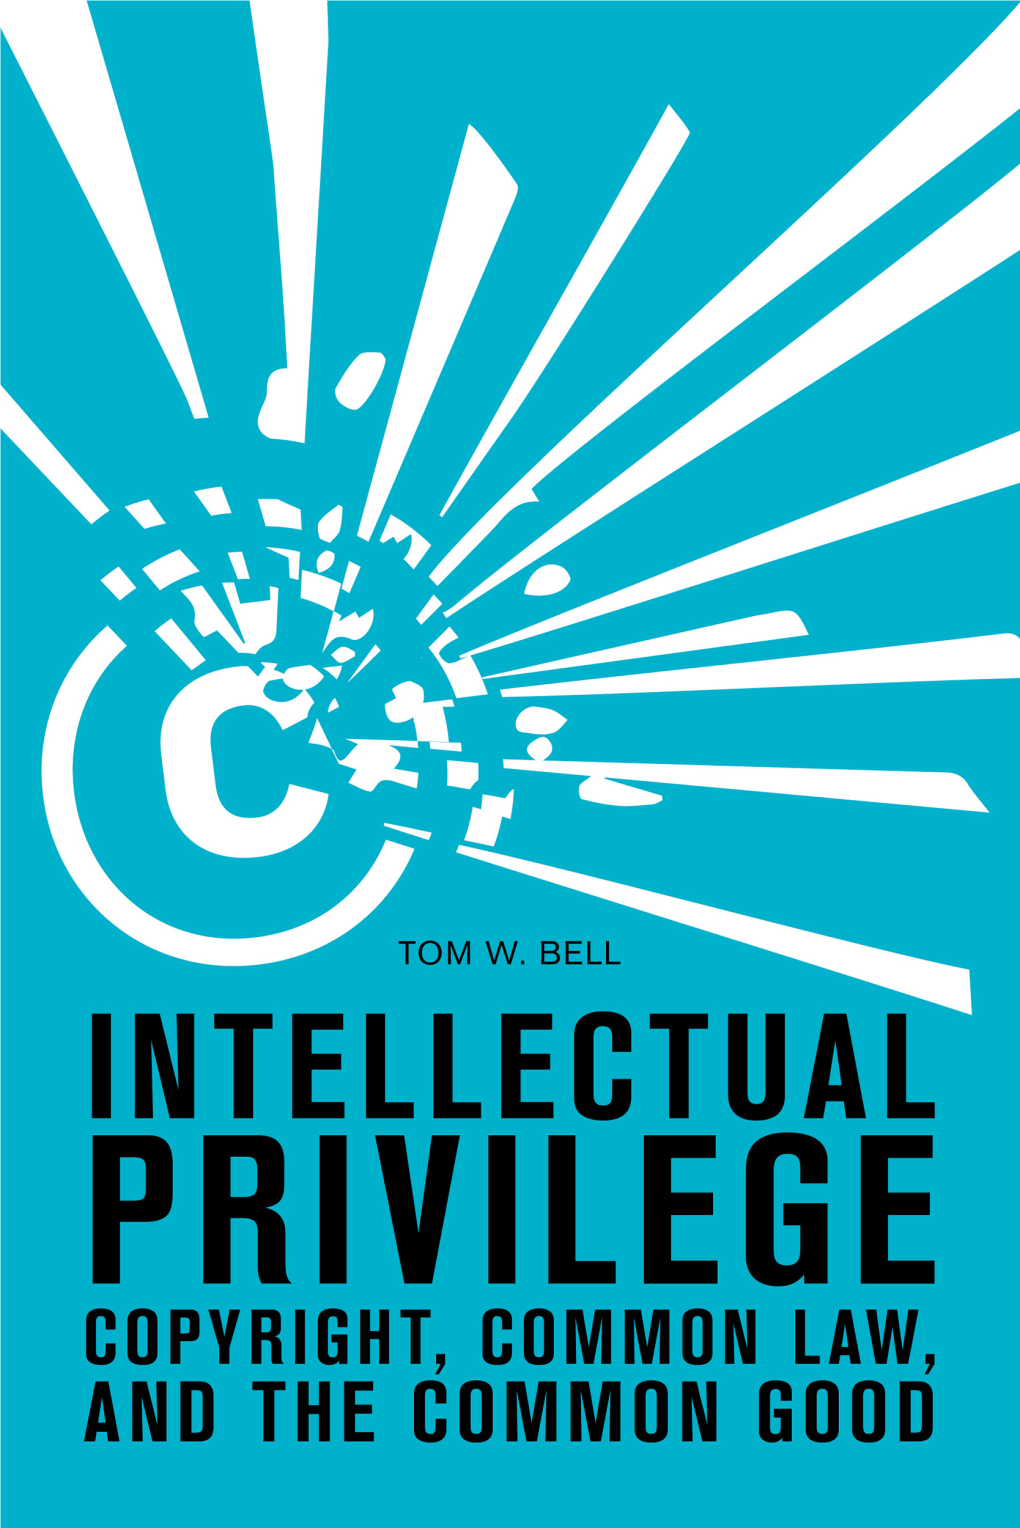 INTELLECTUAL PRIVILEGE: Copyright, Common Law, and The